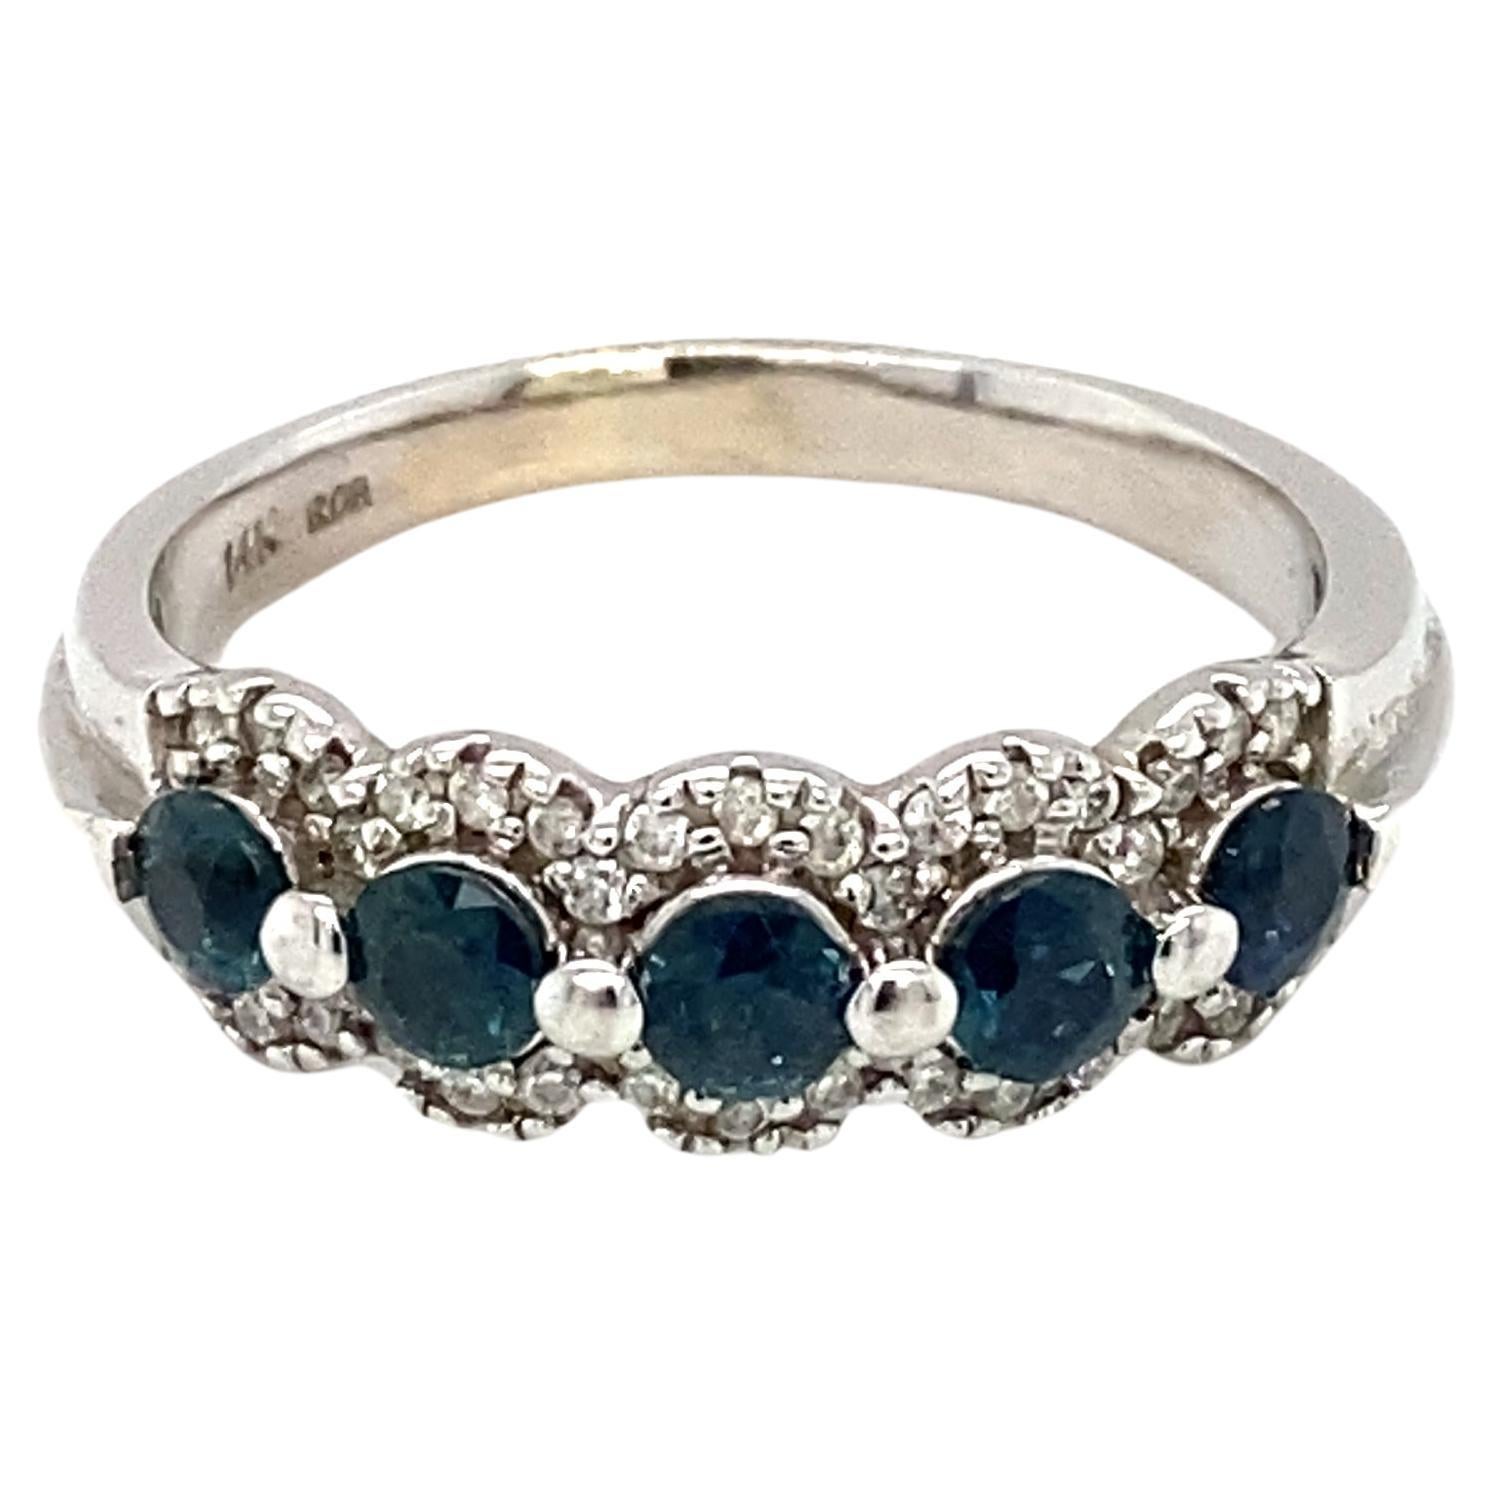 Circa 1970s Sapphire and Diamond Ring in 14K White Gold 